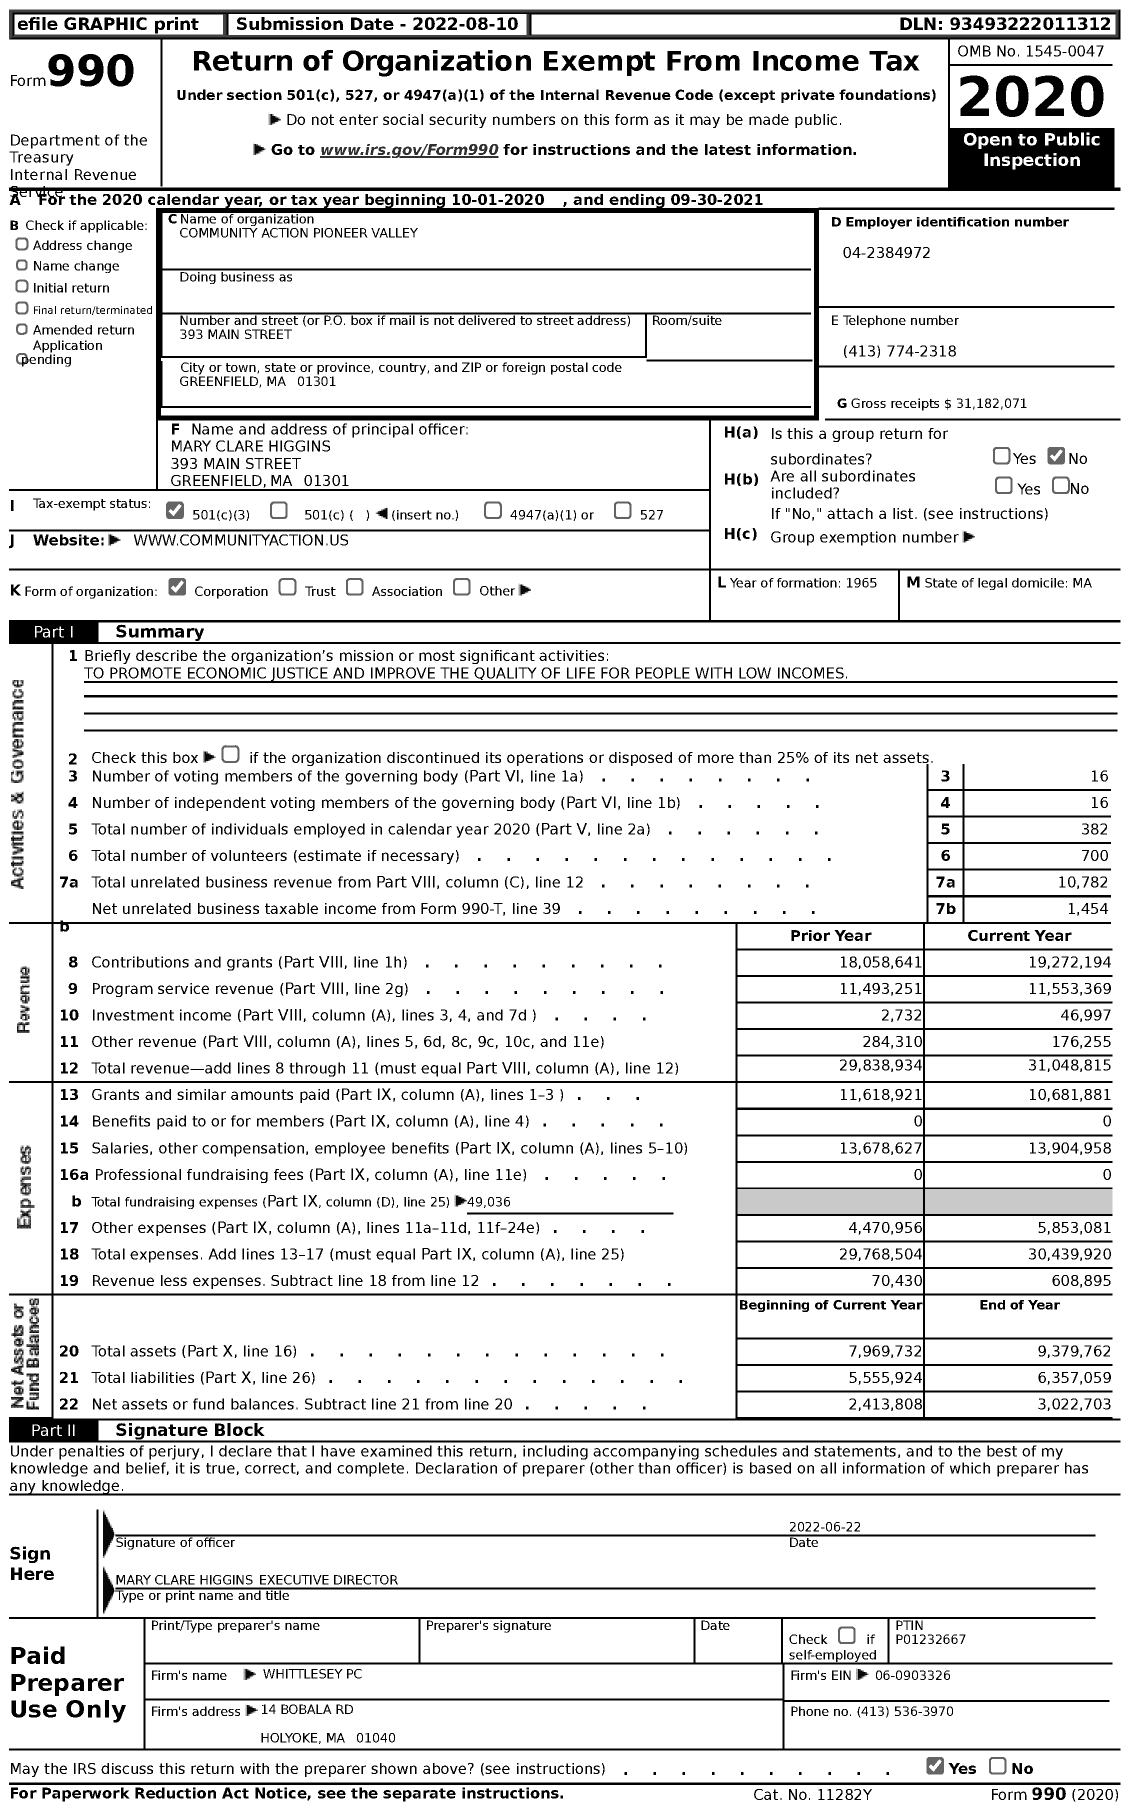 Image of first page of 2020 Form 990 for Community Action Pioneer Valley